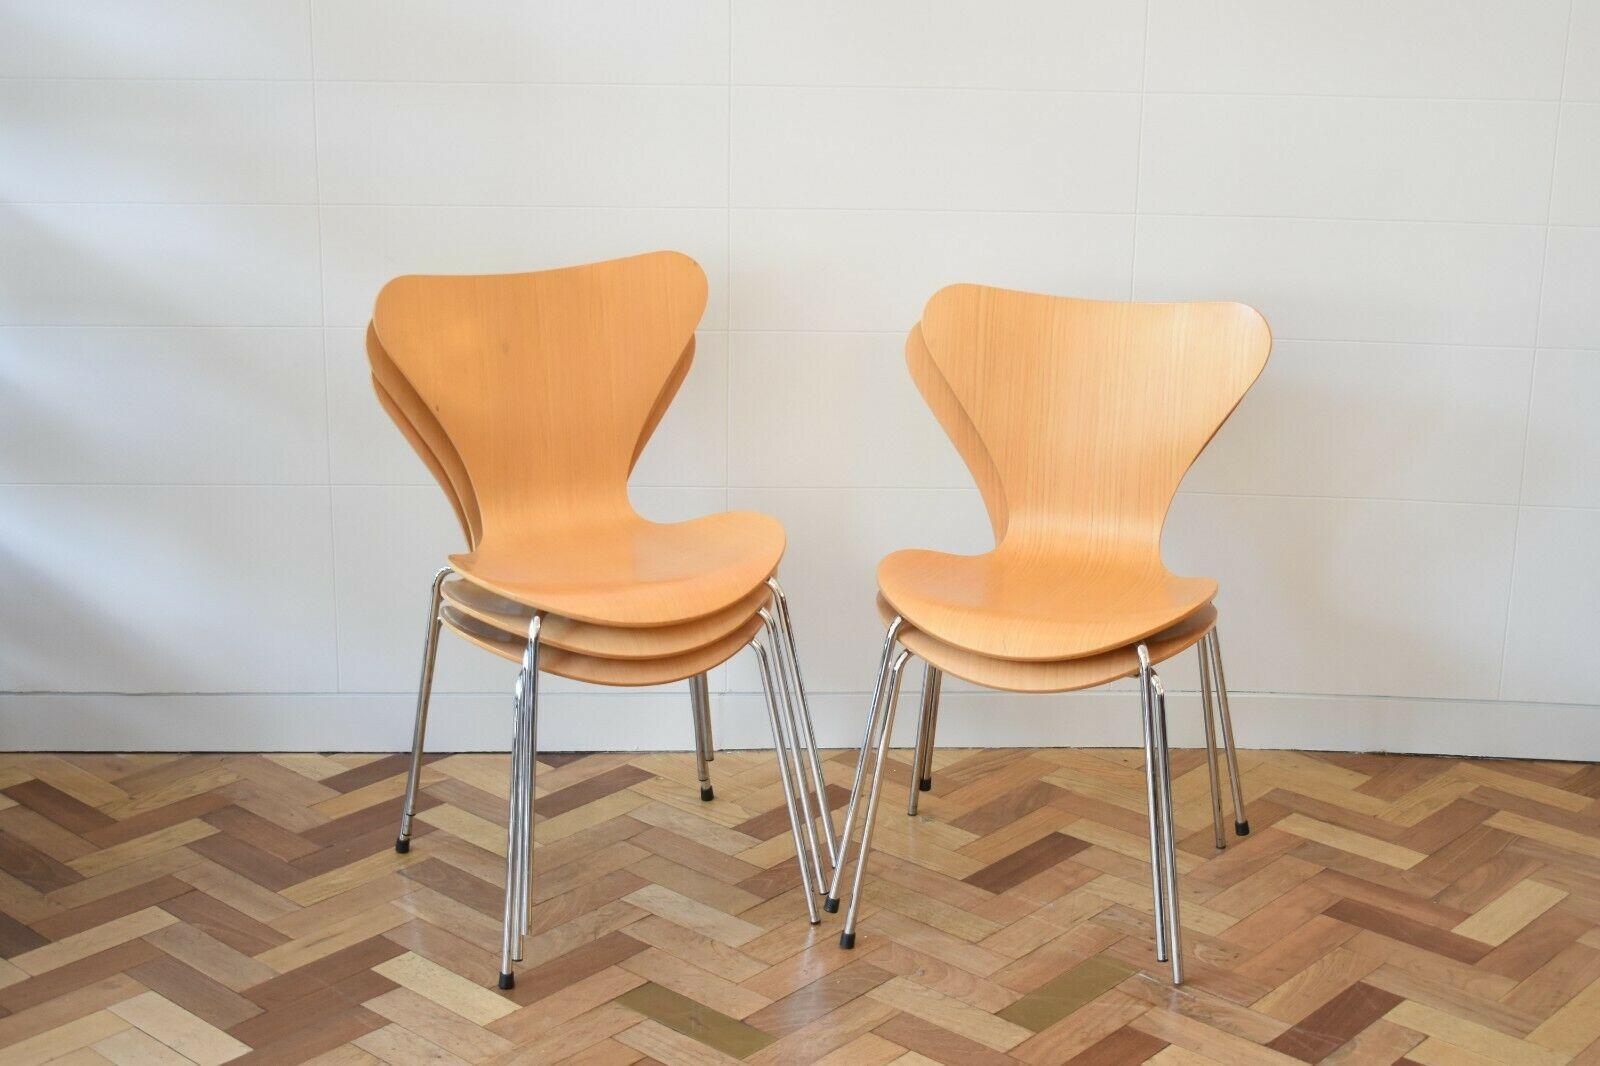 Originally designed by Arne Jacobsen in 1955, the Series 7 chair is truly iconic has been made by Fritz Hansen ever since. Constructed from nine layers of pressure moulded beech wood veneer sitting on steel tubed legs, these 1990s chairs feature the